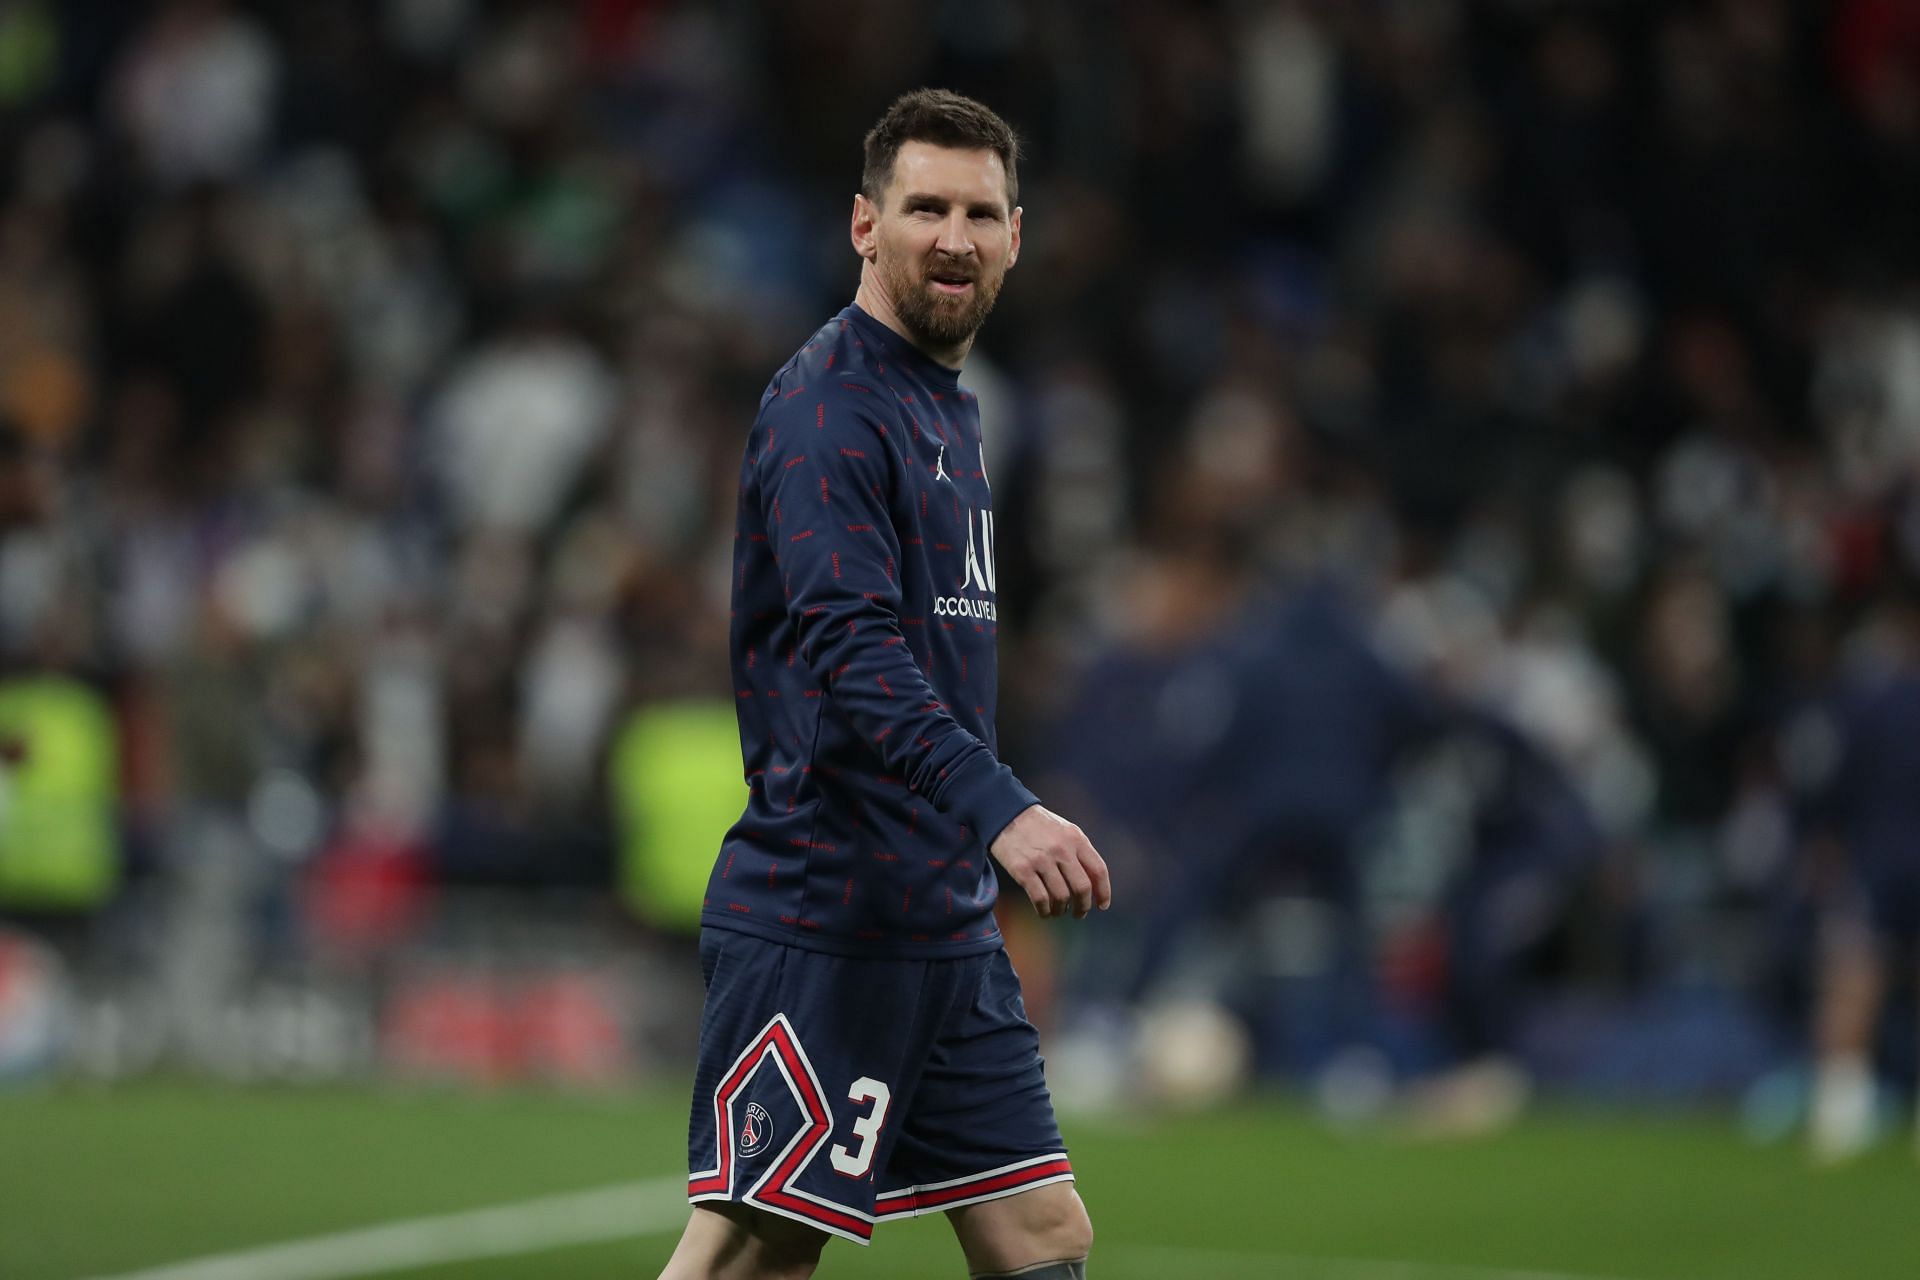 Lionel Messi has signed a $20 million deal with a cryptocurrency company.